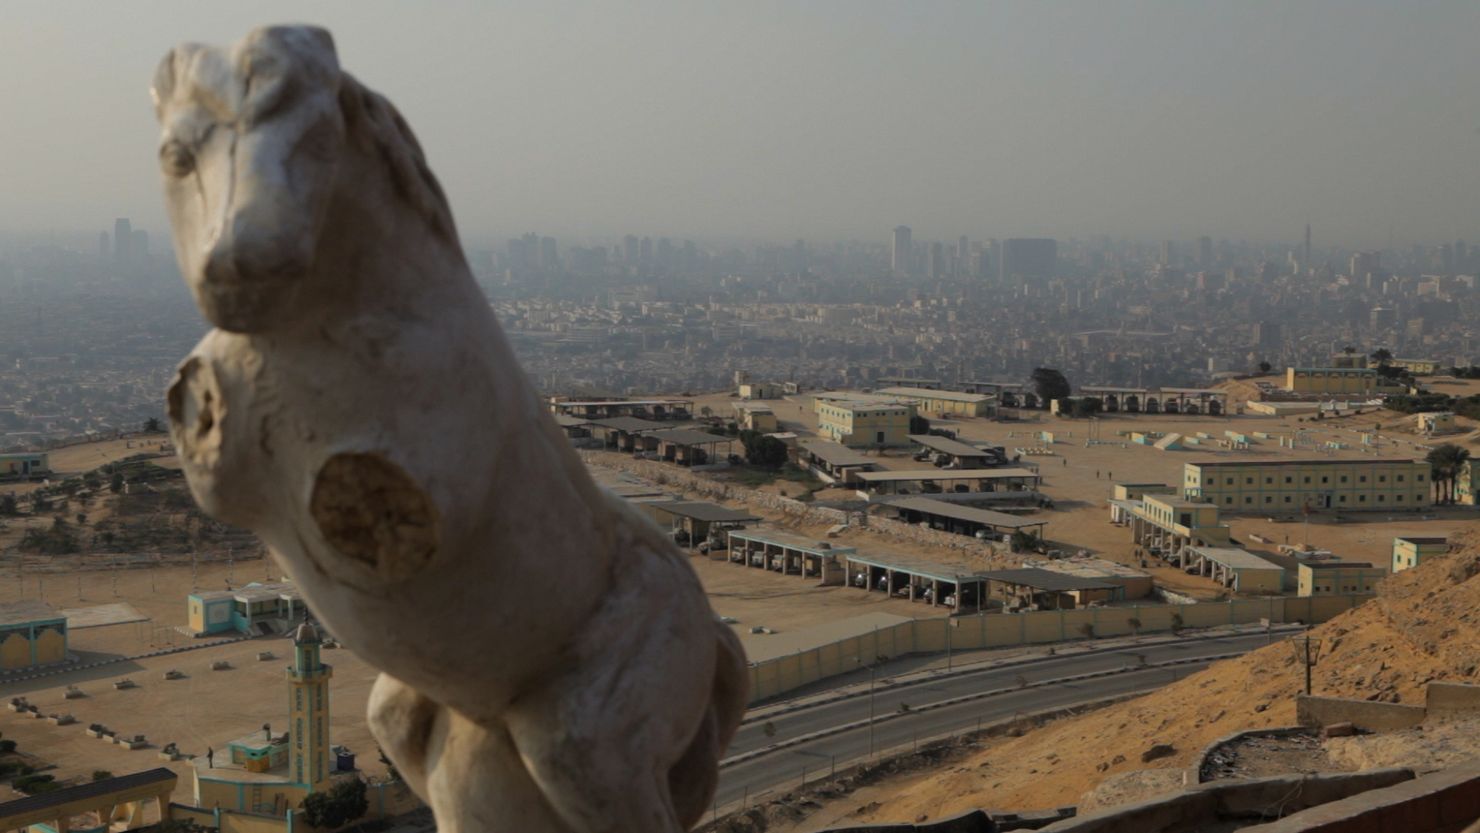 A marble sculpture of a horse-like animal with mutilated upper limbs in front of an area with industrial-looking infrastructure and. A city of the middle east can be seen in the background.